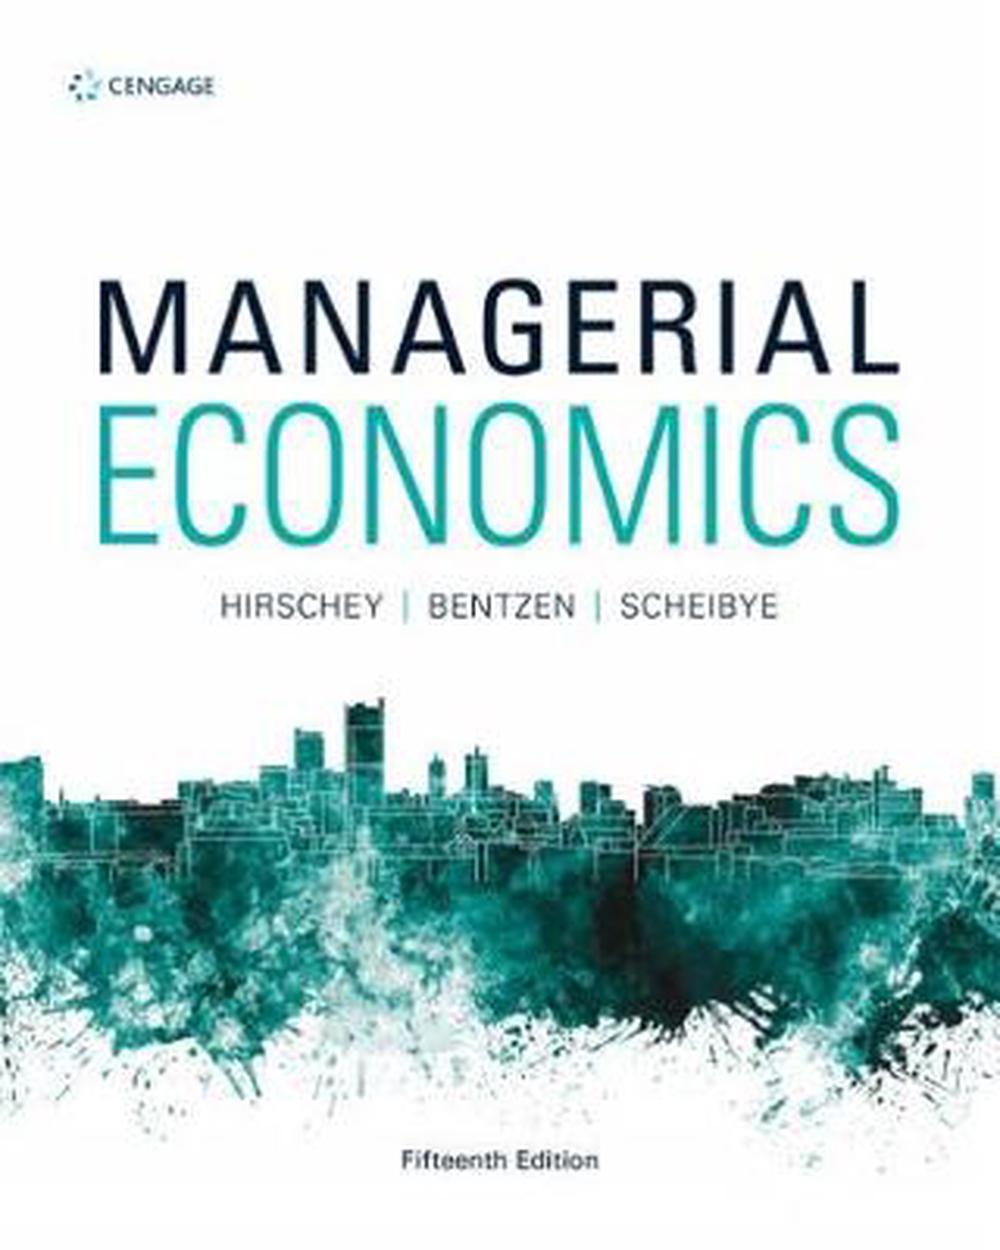 article review related to managerial economics